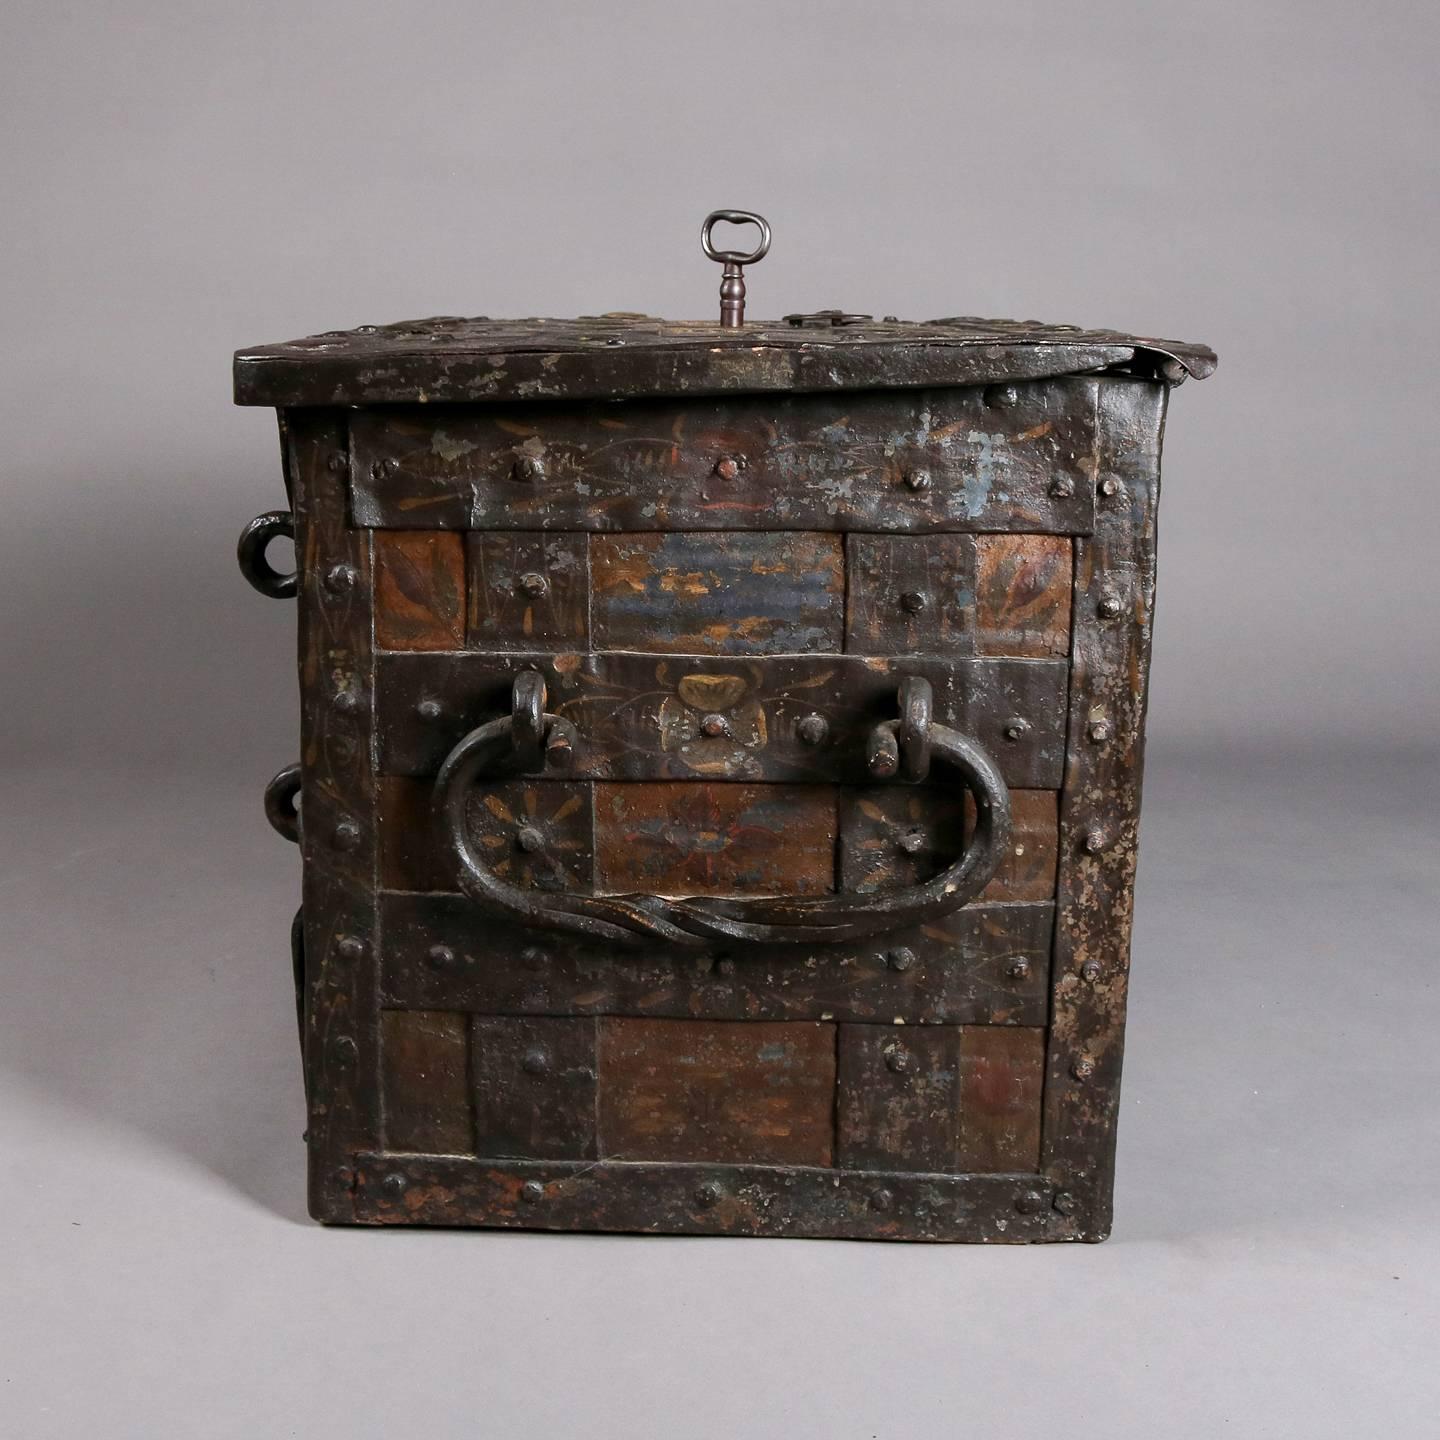 Hand-Forged Iron Pirate's Chest with Hand-Painted Maritime Vignettes 1